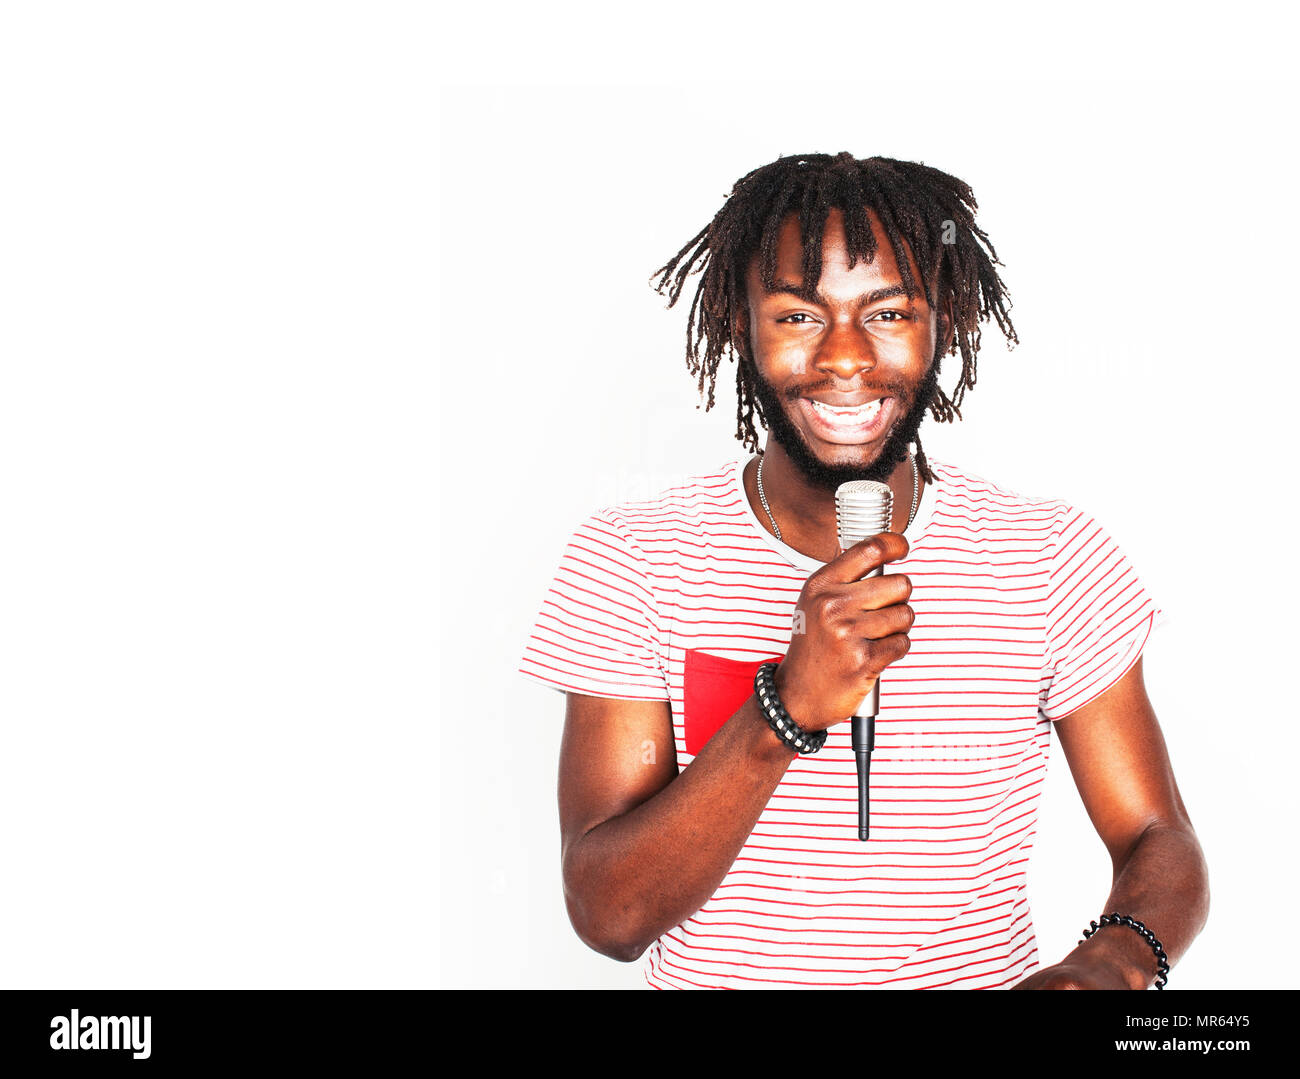 young handsome african american boy singing emotional with microphone isolated on white background, in motion gesturing smiling, lifestyle people conc Stock Photo